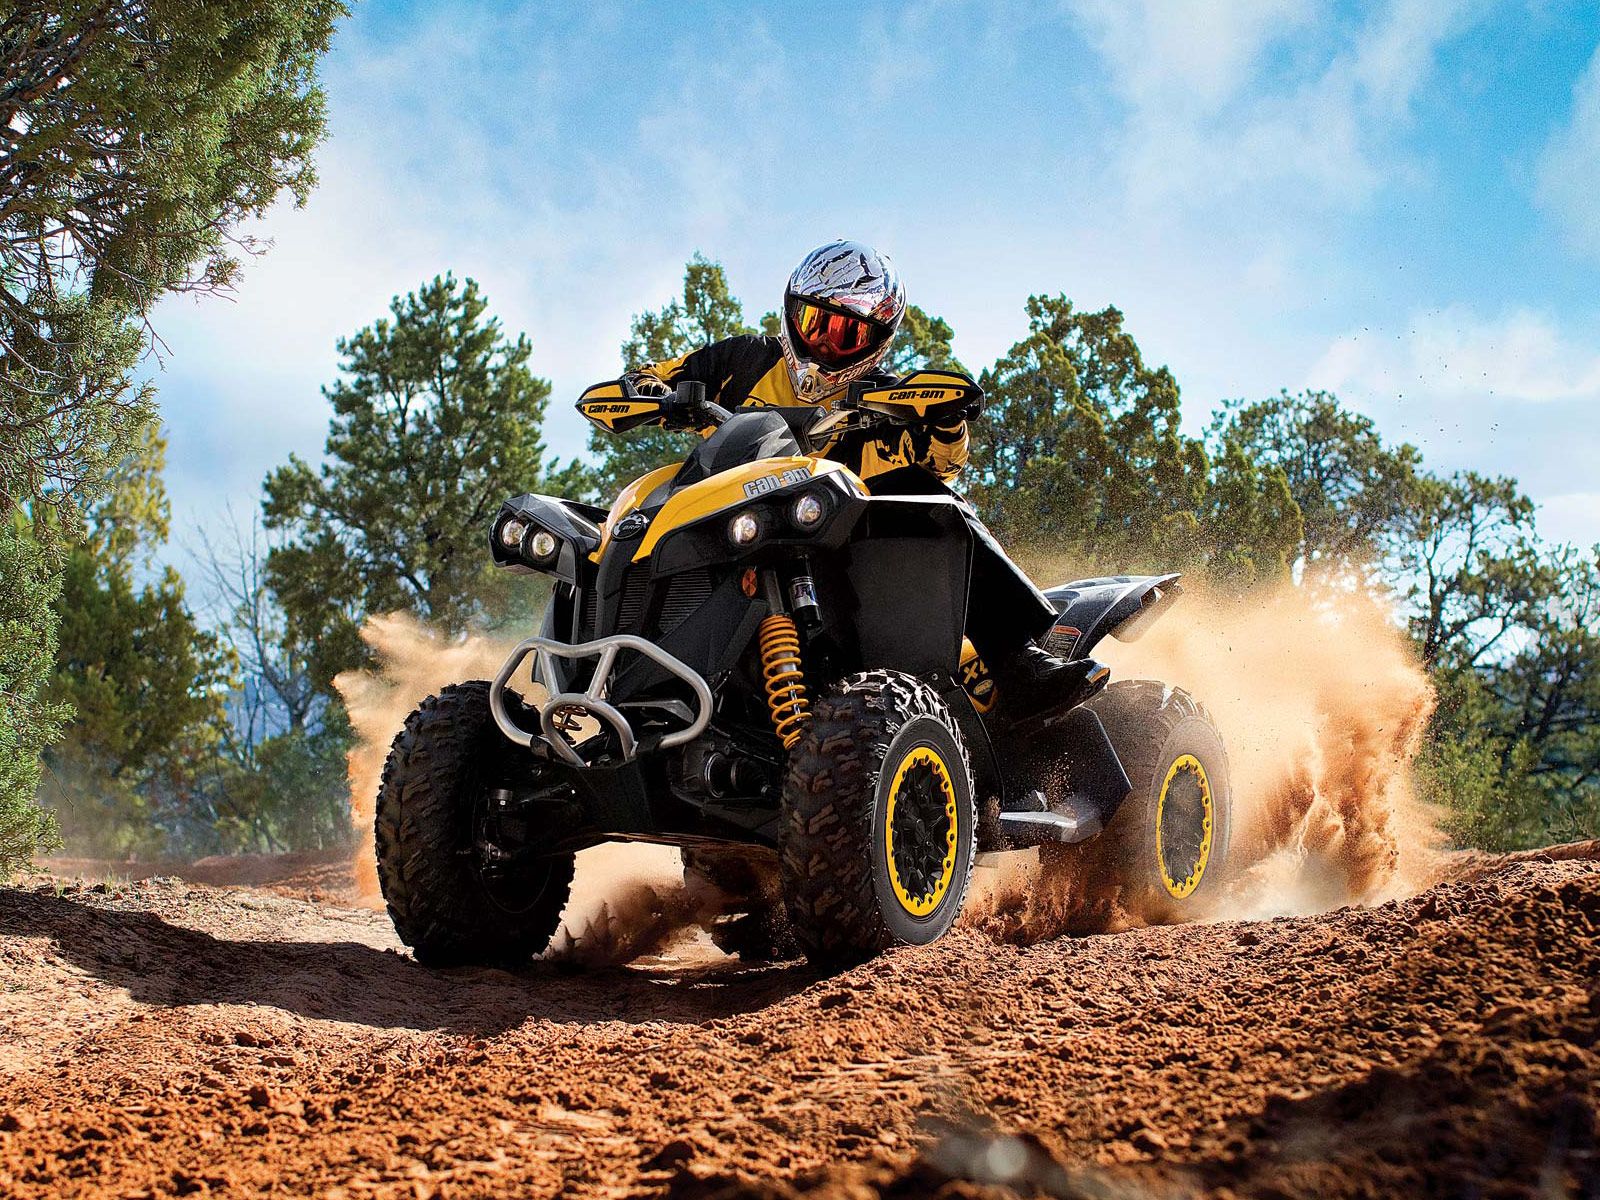 ATV Picture, Wallpaper, Specs, Insurance, Accident Lawyers: Can Am Insurance Information 2013 Renegade Xxc 800R ATV Picture